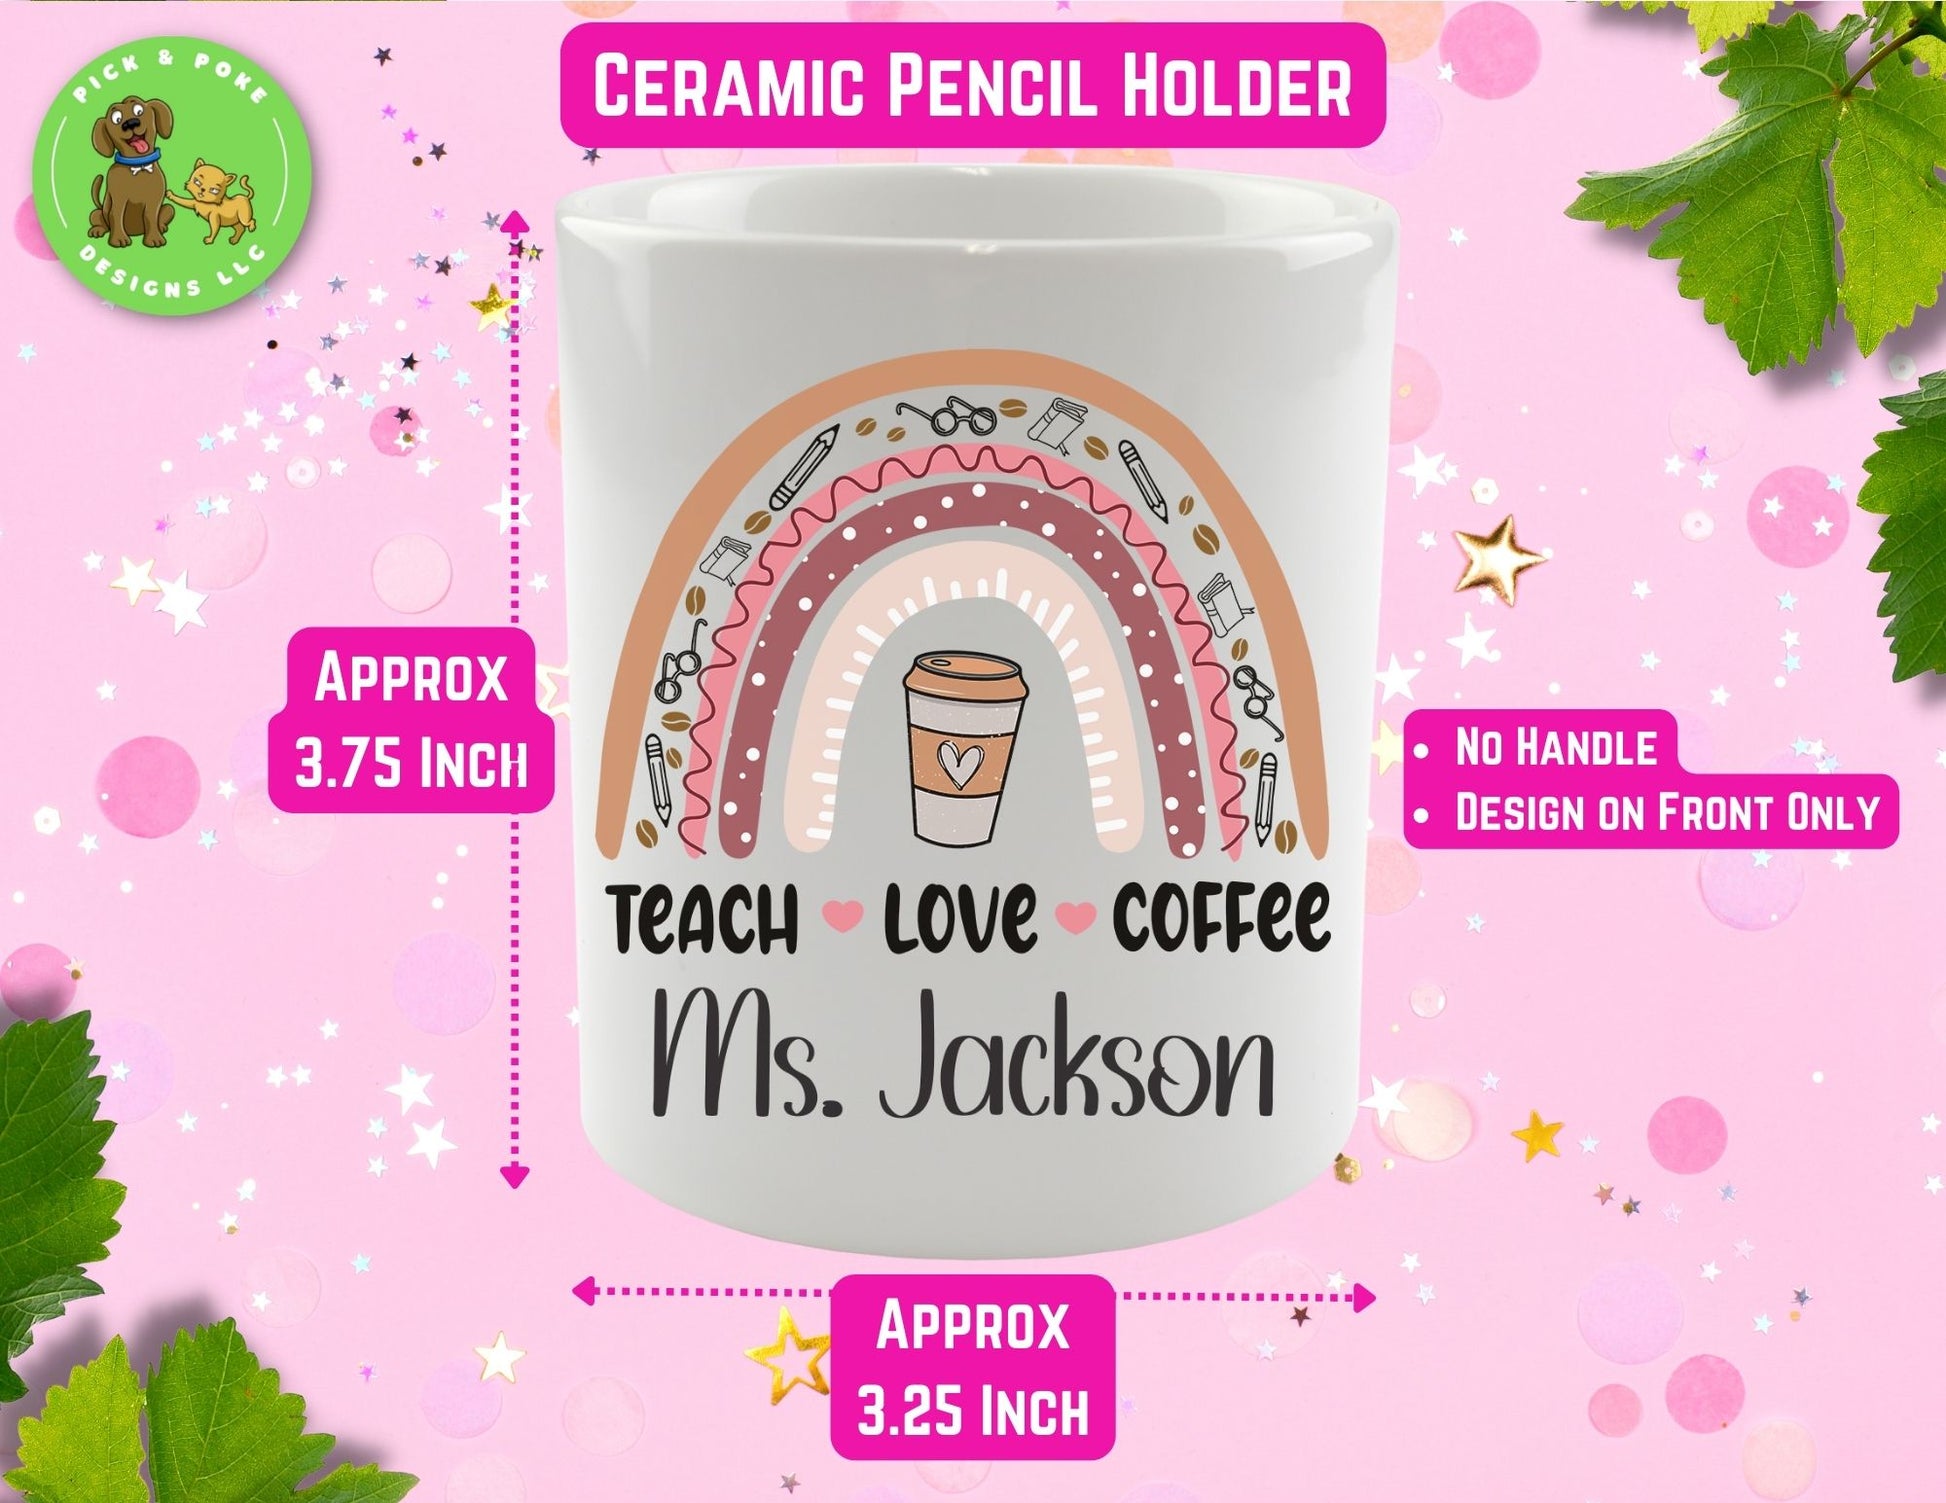 Personalized teach love coffee ceramic pencil holder is 3.75 inches tall and has a circumference of 10.5 inches. 